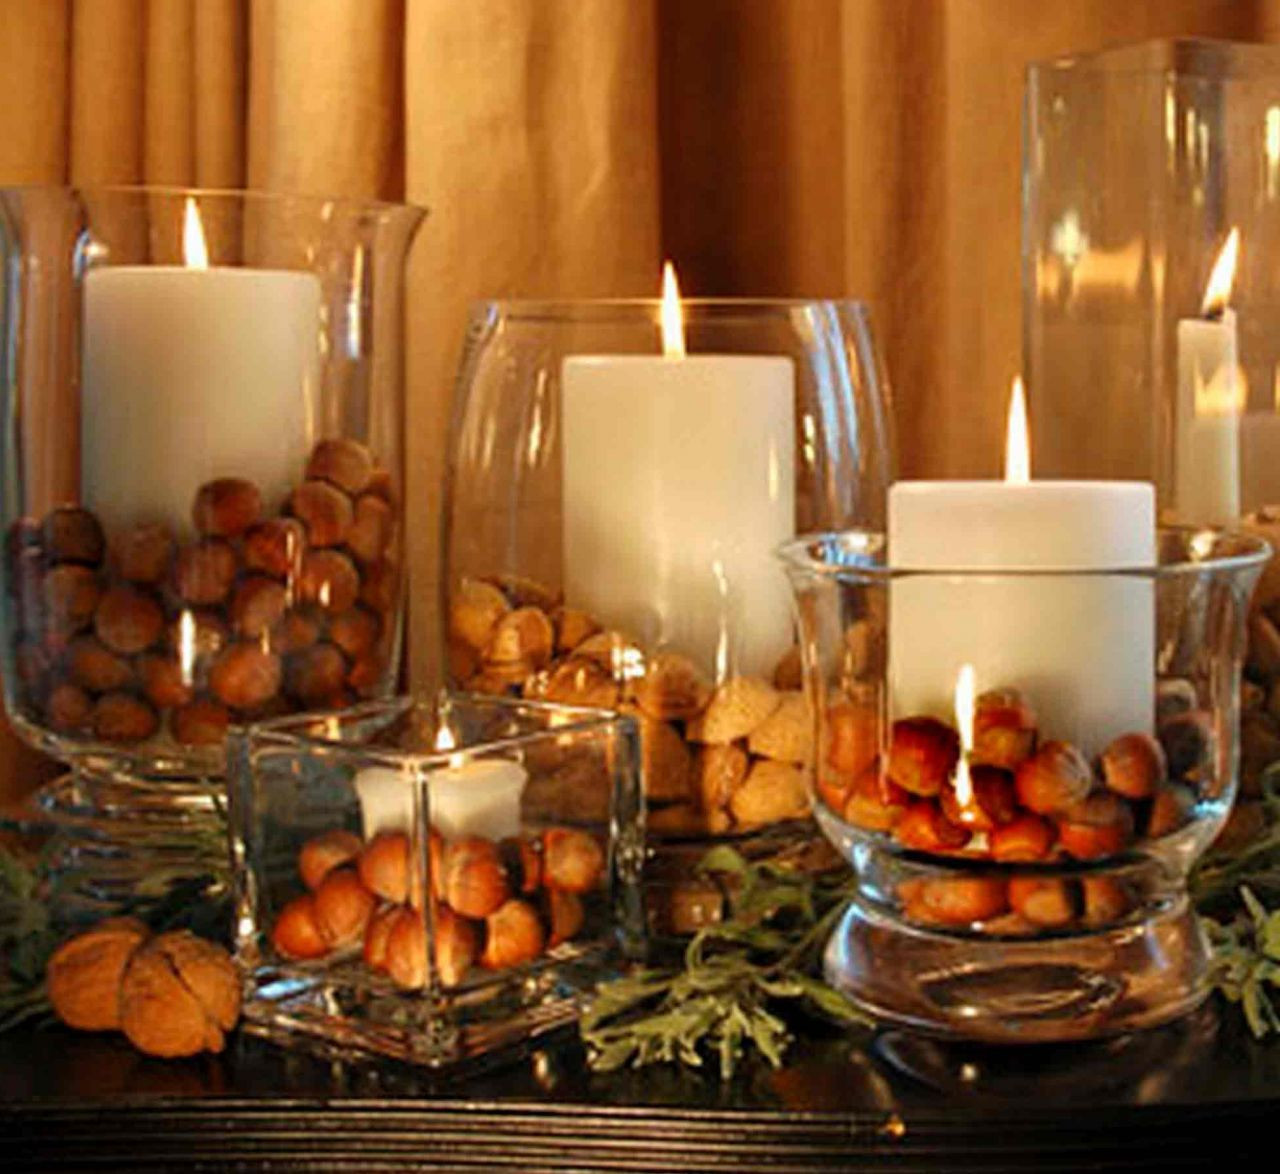 Thanksgiving Dinner Party Decorating Ideas
 Fall Decorations For Dinner Party Centerpiece